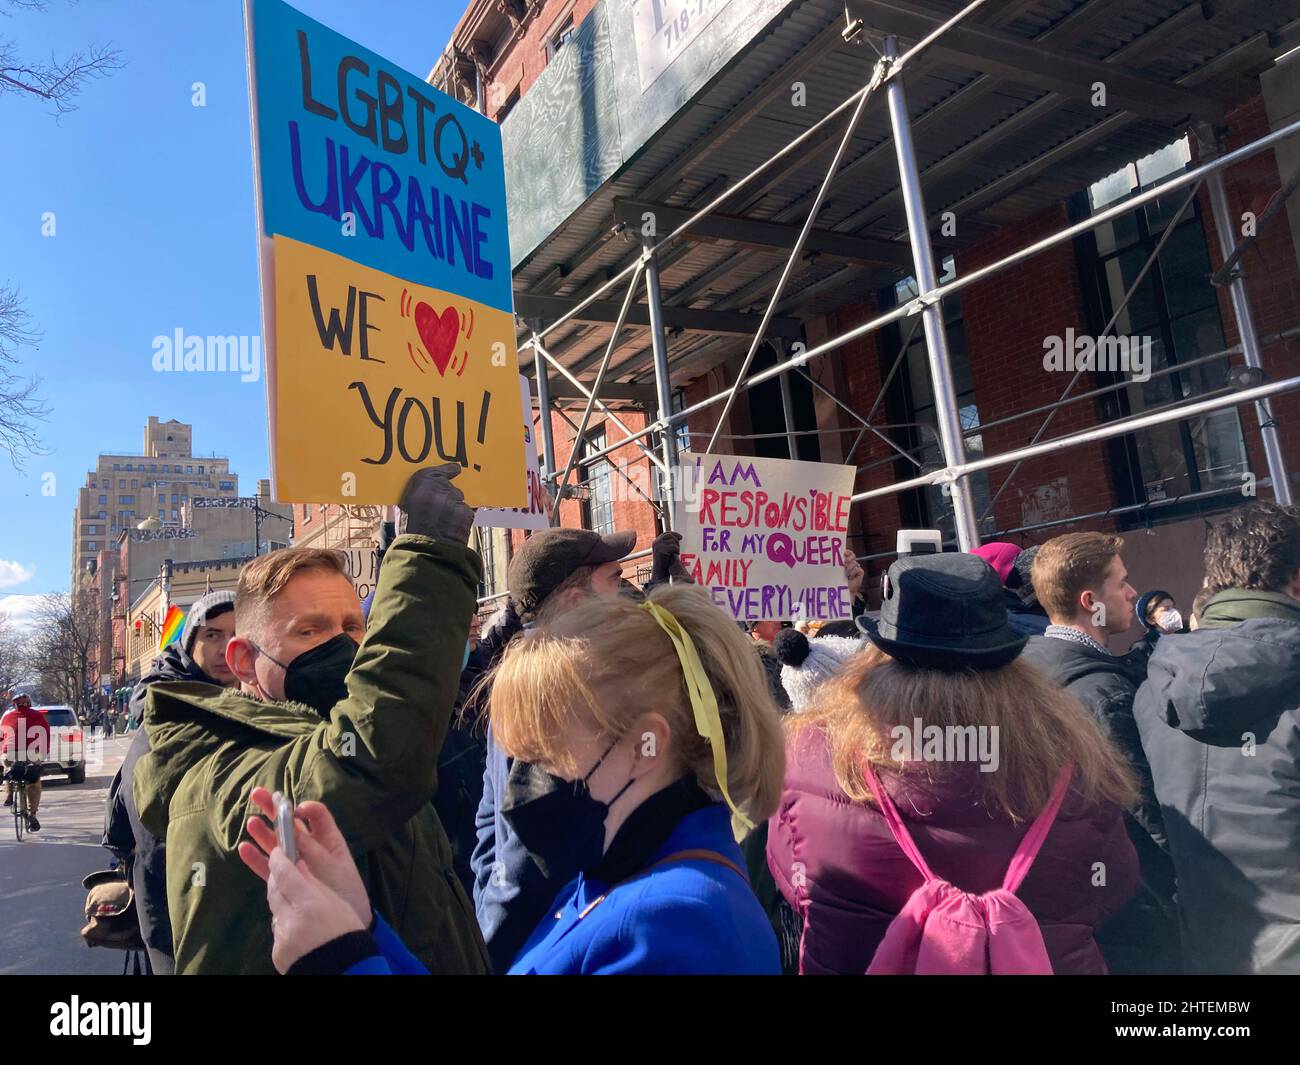 Members of the LGBTQ+ community, their supporters and Ukrainian-Americans protest the Russian invasion and show support for the citizens of the Ukraine, in front of the Stonewall Inn in Greenwich Village in New York on Saturday, February 26, 2022. (© Frances M. Roberts) Stock Photo